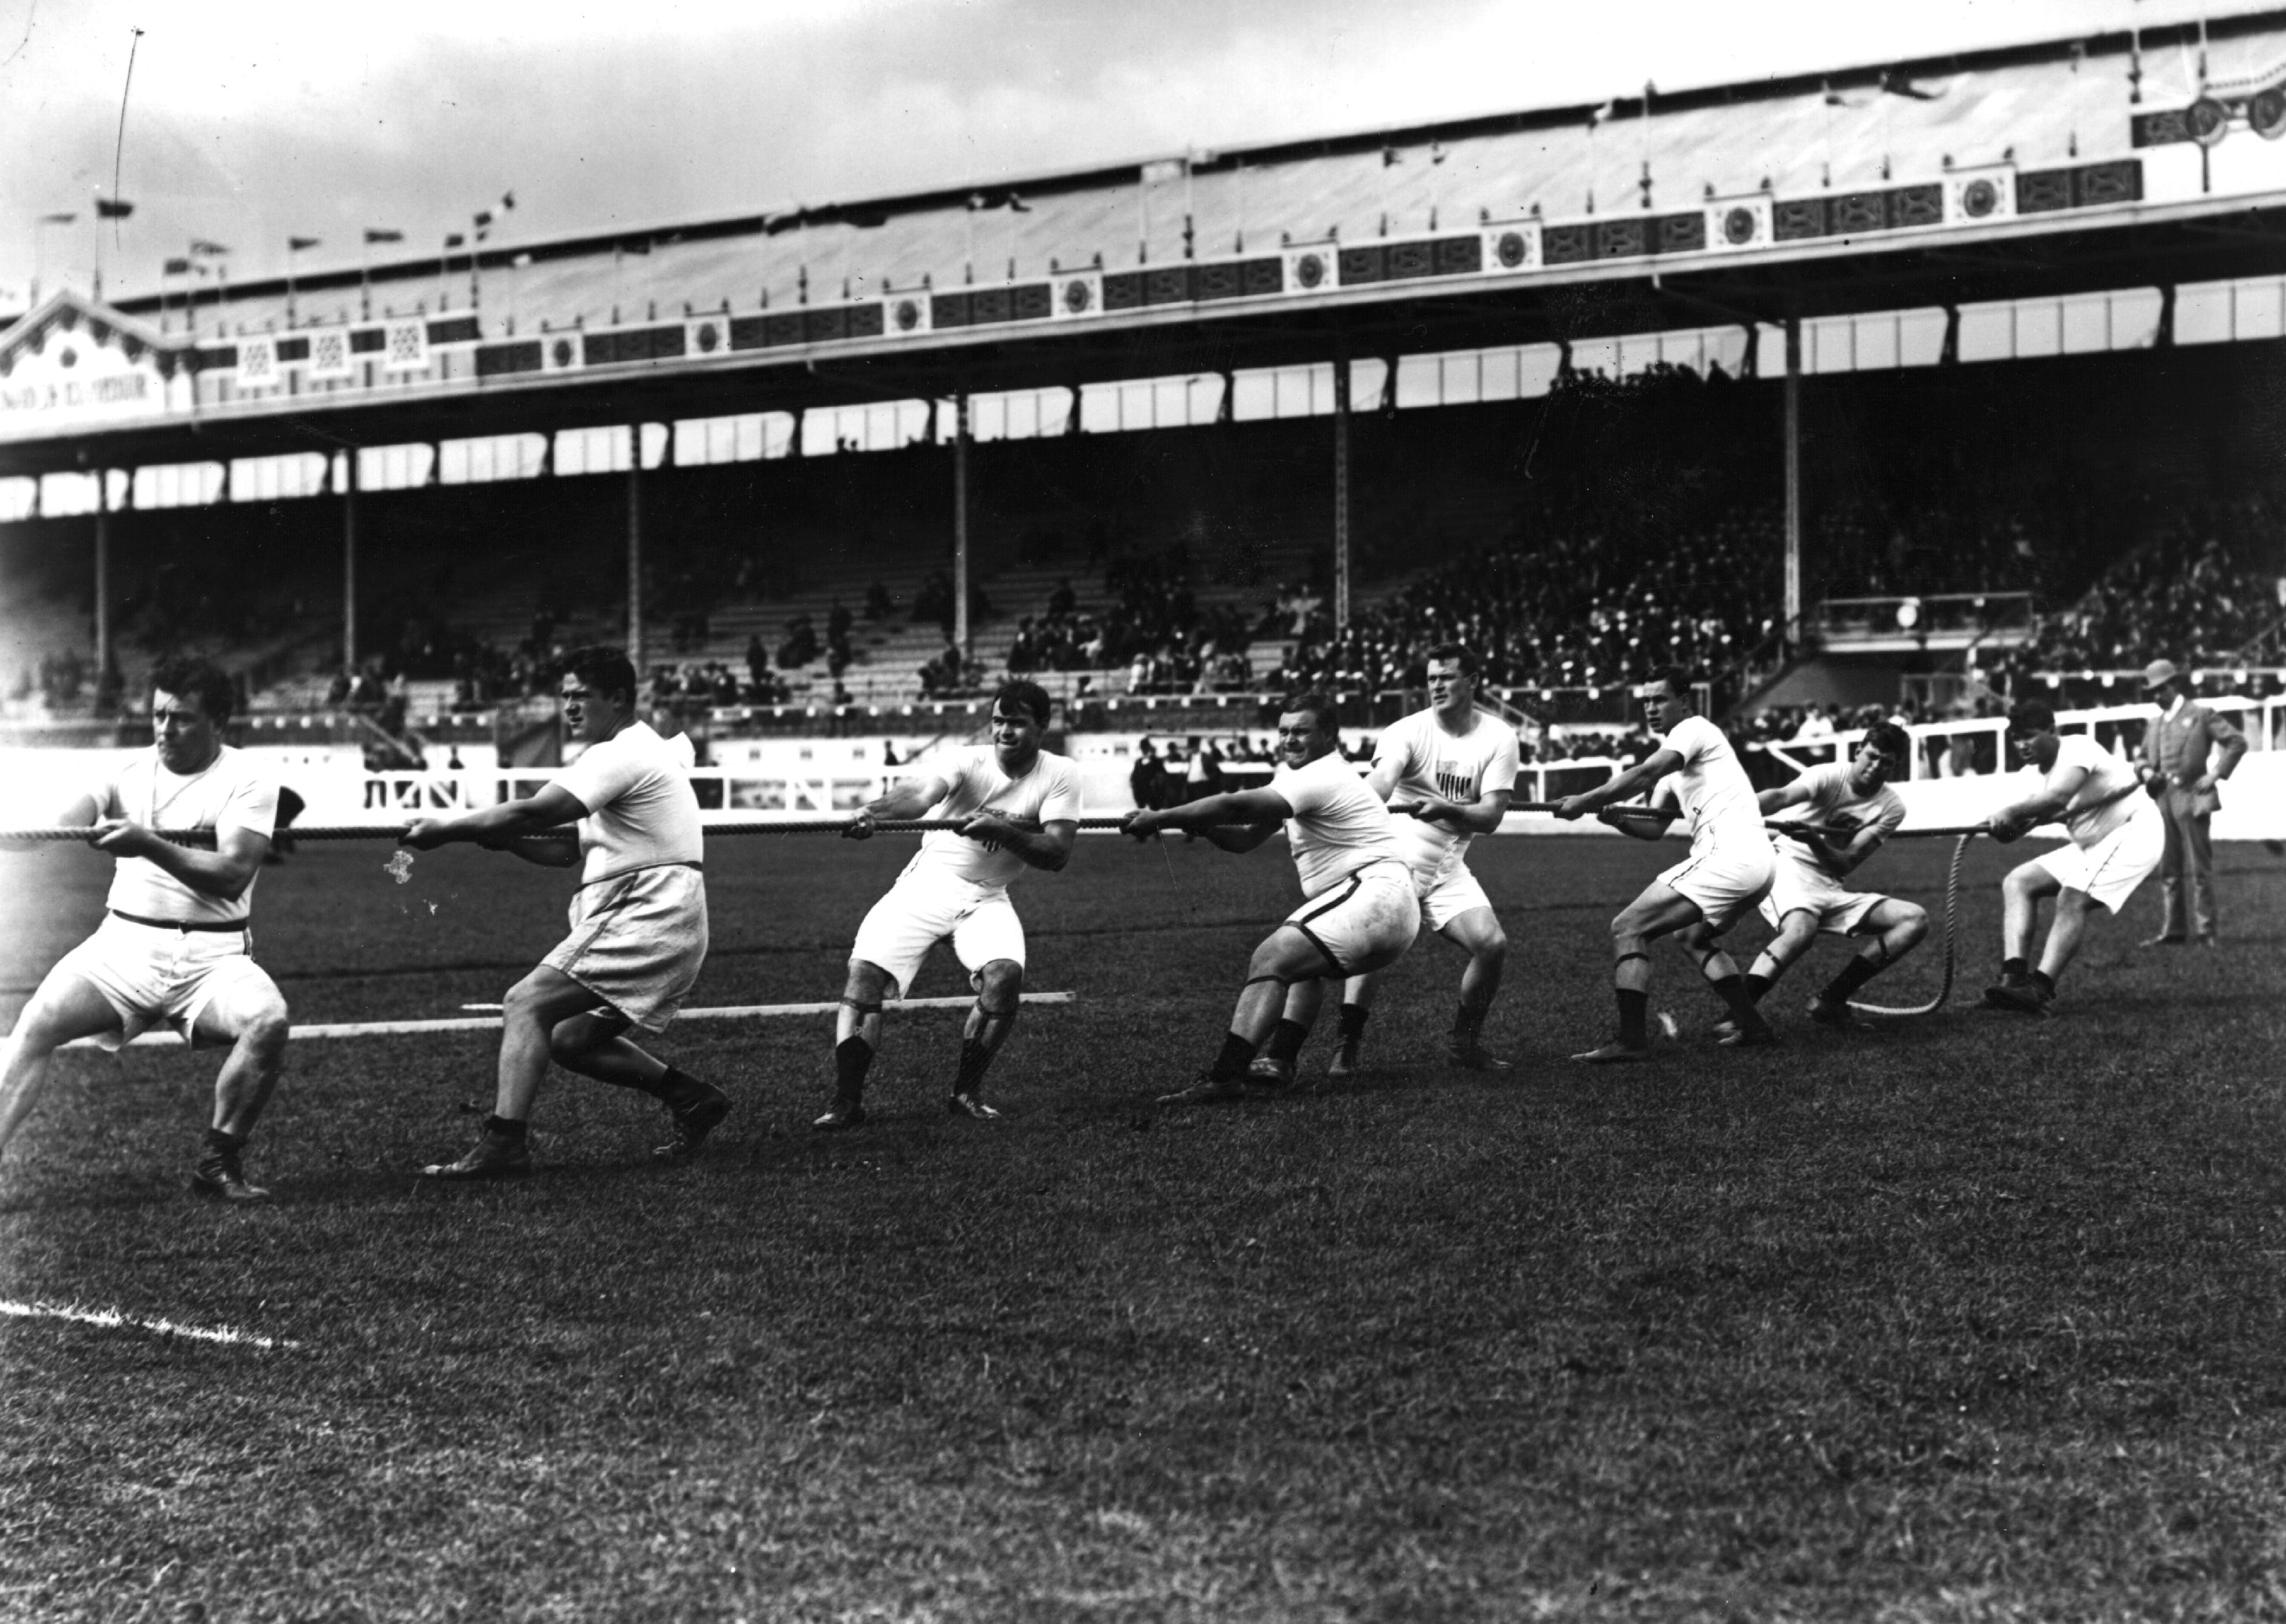 The U.S. Tug of War team compete in the 1908 Olympics in London.